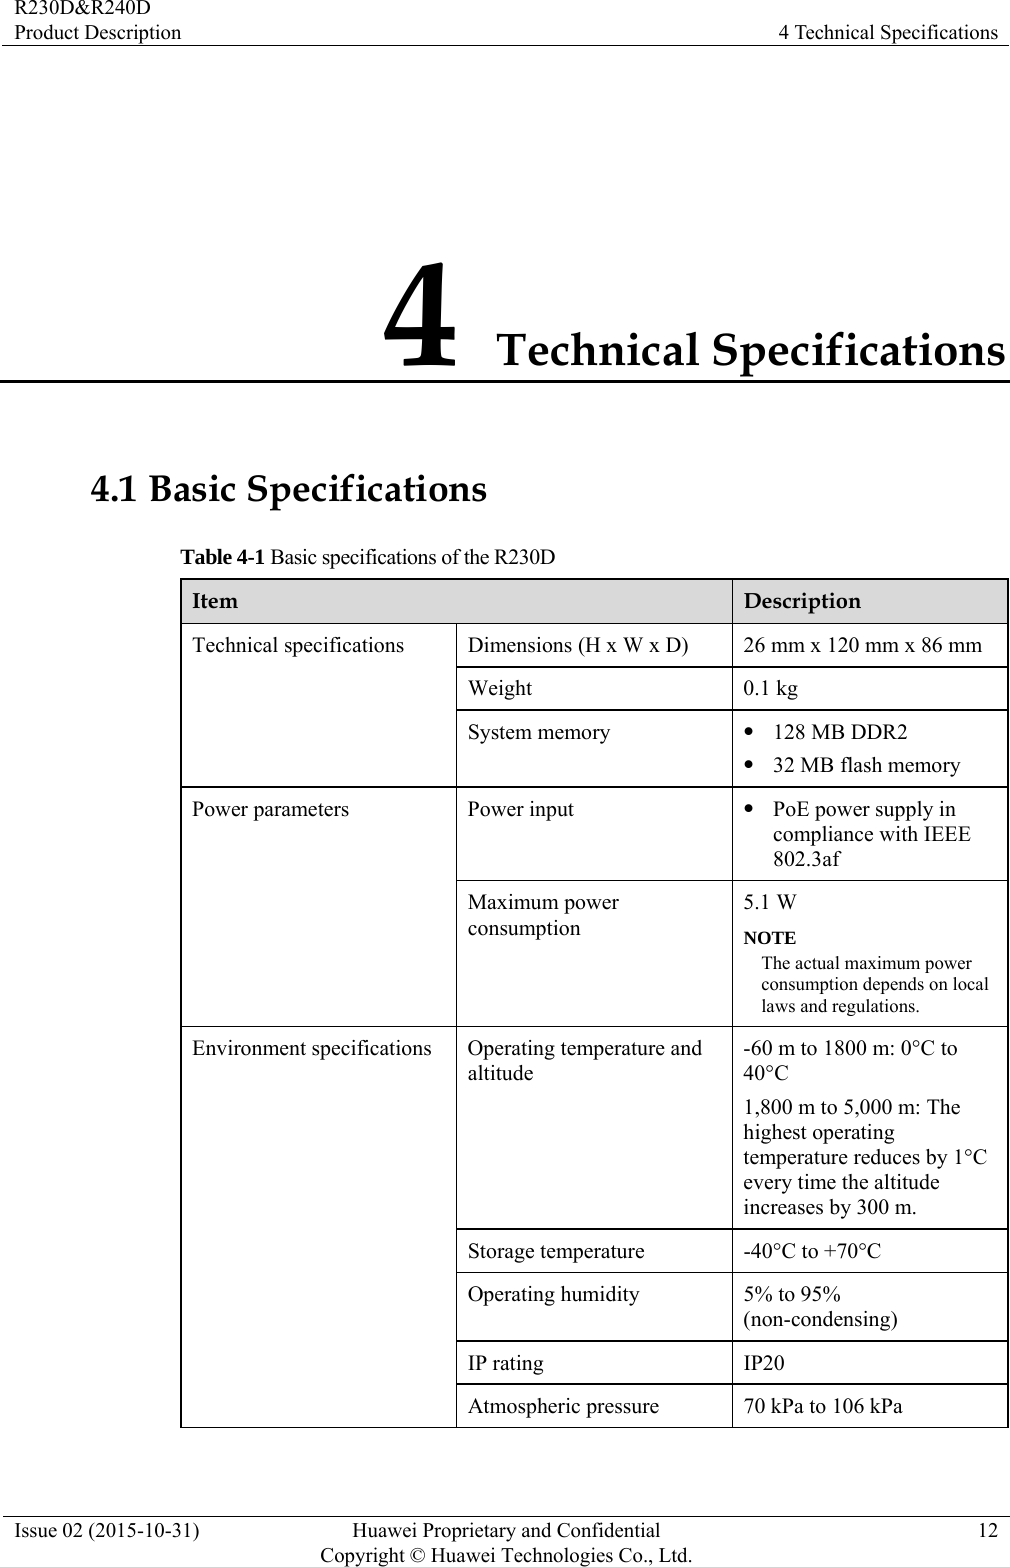 R230D&amp;R240D Product Description  4 Technical Specifications Issue 02 (2015-10-31)  Huawei Proprietary and Confidential         Copyright © Huawei Technologies Co., Ltd.12 4 Technical Specifications 4.1 Basic Specifications Table 4-1 Basic specifications of the R230D Item  Description Technical specifications  Dimensions (H x W x D)  26 mm x 120 mm x 86 mm Weight 0.1 kg System memory  z 128 MB DDR2 z 32 MB flash memory Power parameters  Power input  z PoE power supply in compliance with IEEE 802.3af Maximum power consumption 5.1 W NOTE The actual maximum power consumption depends on local laws and regulations. Environment specifications  Operating temperature and altitude -60 m to 1800 m: 0°C to 40°C 1,800 m to 5,000 m: The highest operating temperature reduces by 1°C every time the altitude increases by 300 m. Storage temperature  -40°C to +70°C Operating humidity  5% to 95% (non-condensing) IP rating  IP20 Atmospheric pressure  70 kPa to 106 kPa  